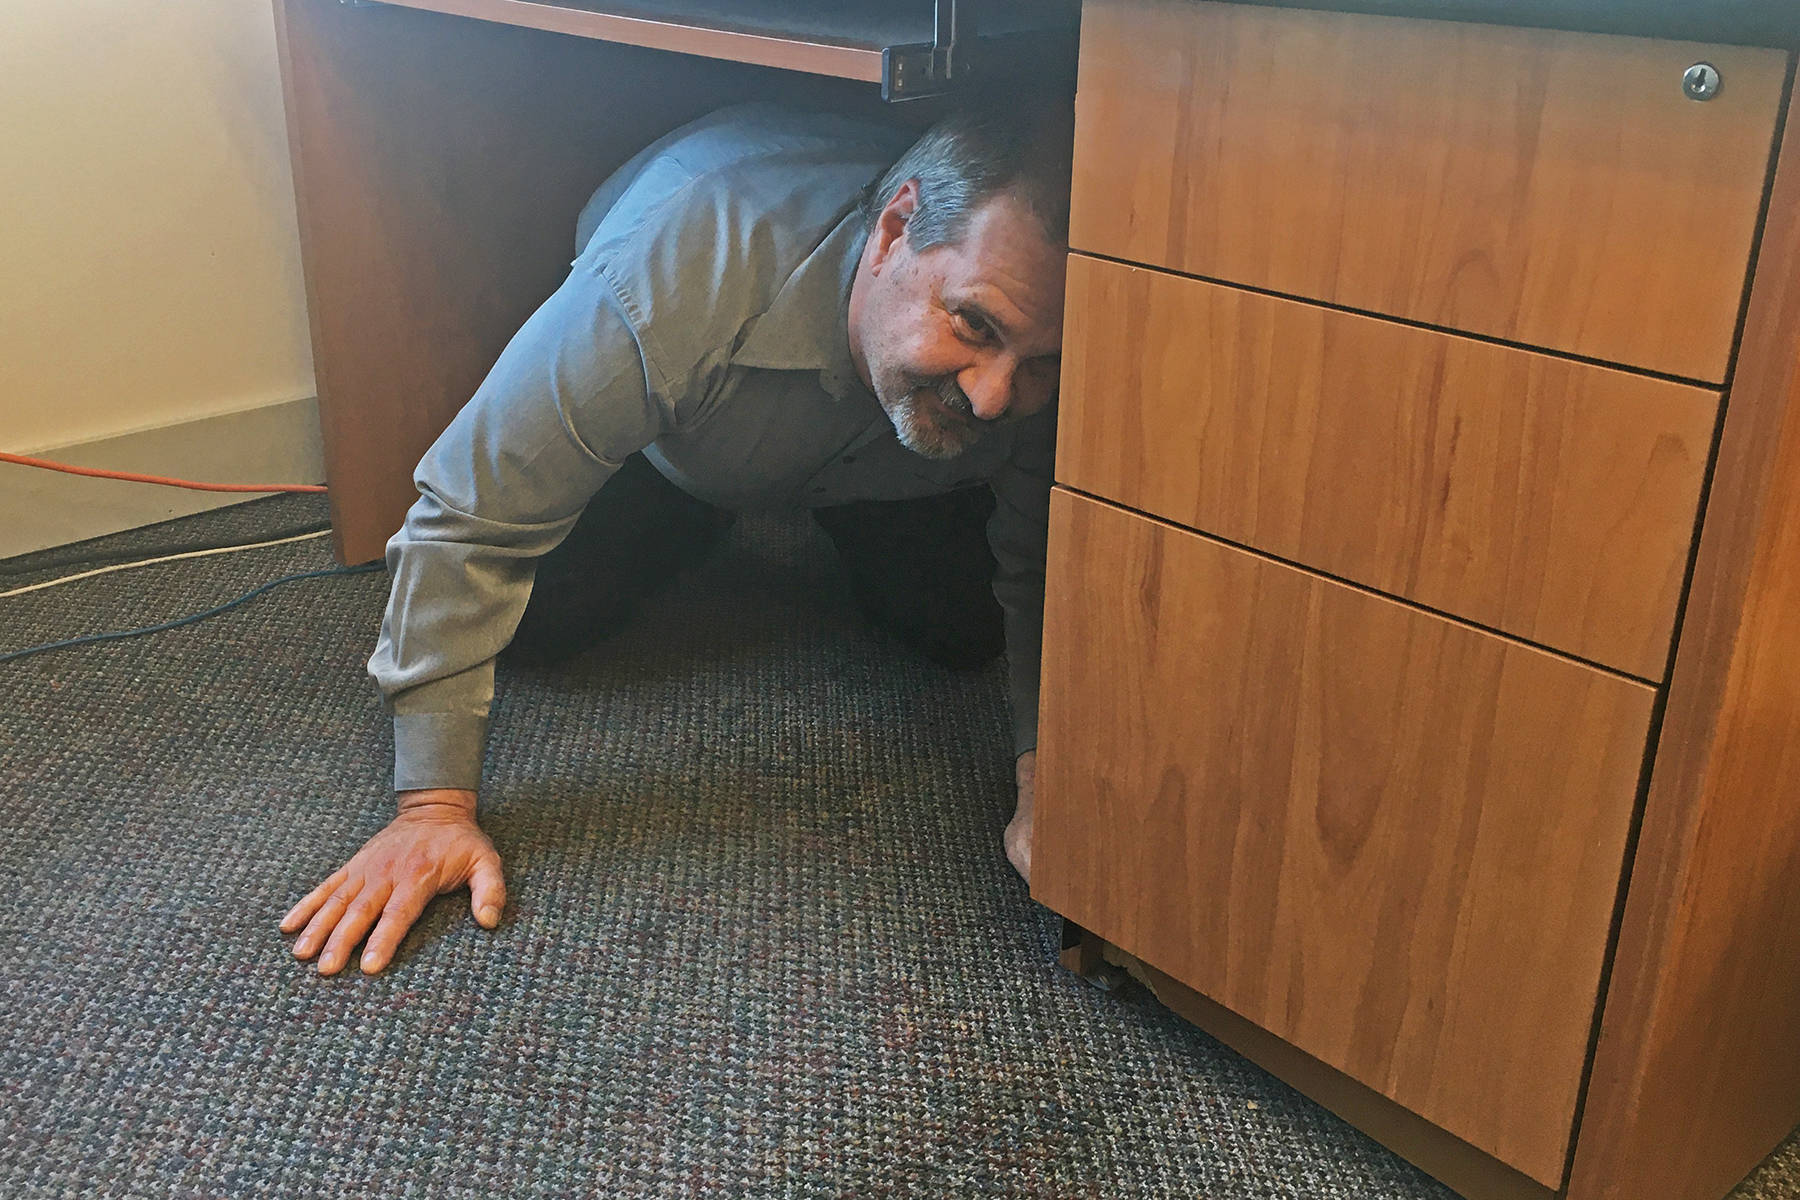 Offices, schools, homes and more offer protection in the event of an earthquake. The Great BC ShakeOut is slated for Oct. 15, but individuals and socially distanced groups can practice earthquake drills anytime. (Black Press media file photo)